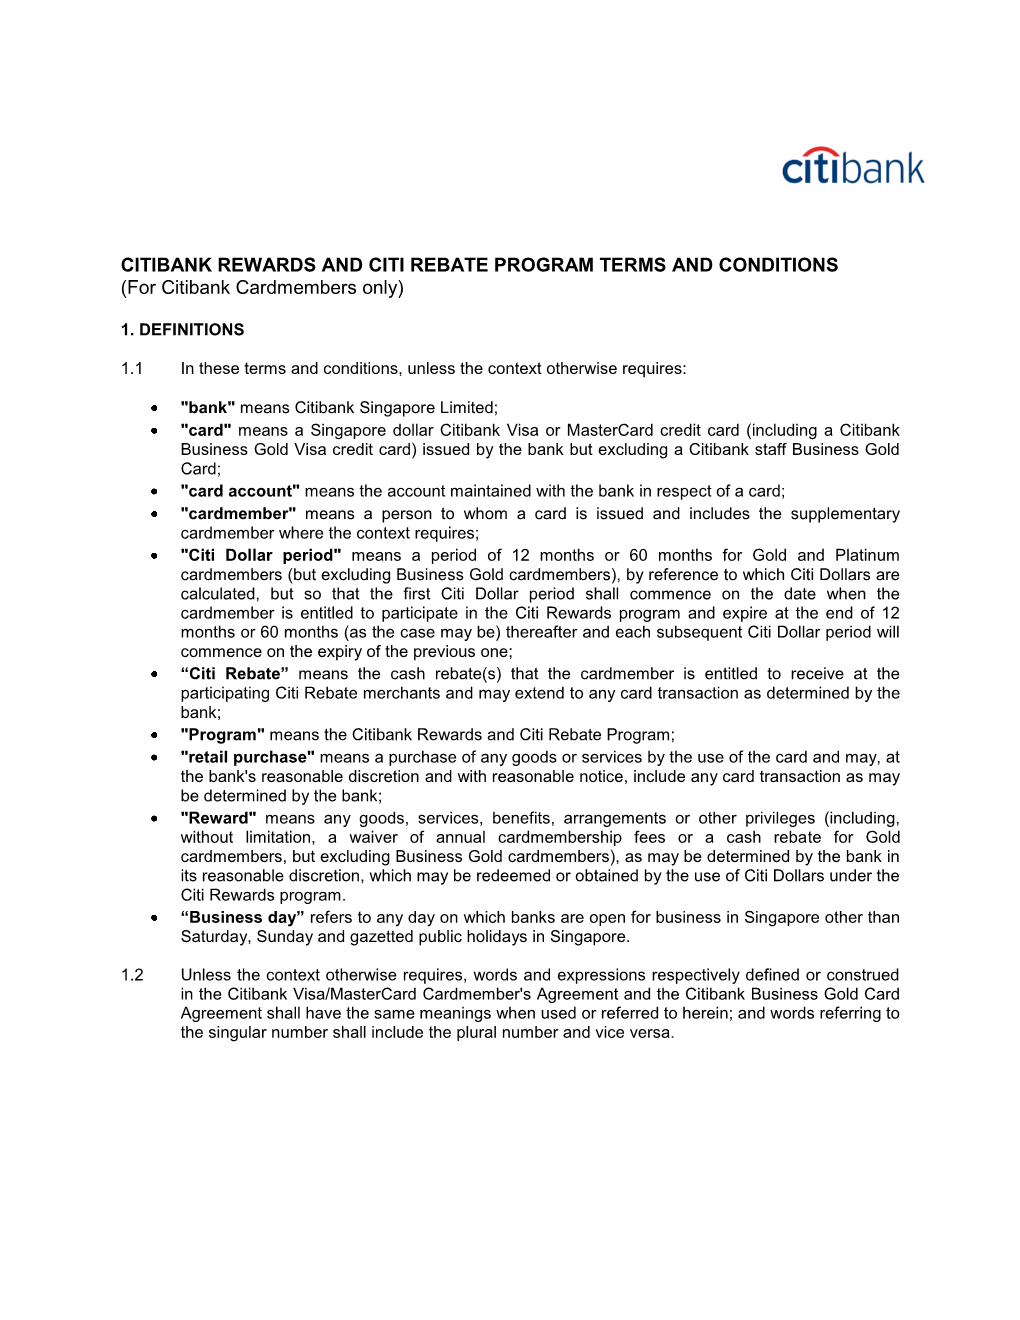 CITIBANK REWARDS and CITI REBATE PROGRAM TERMS and CONDITIONS (For Citibank Cardmembers Only)